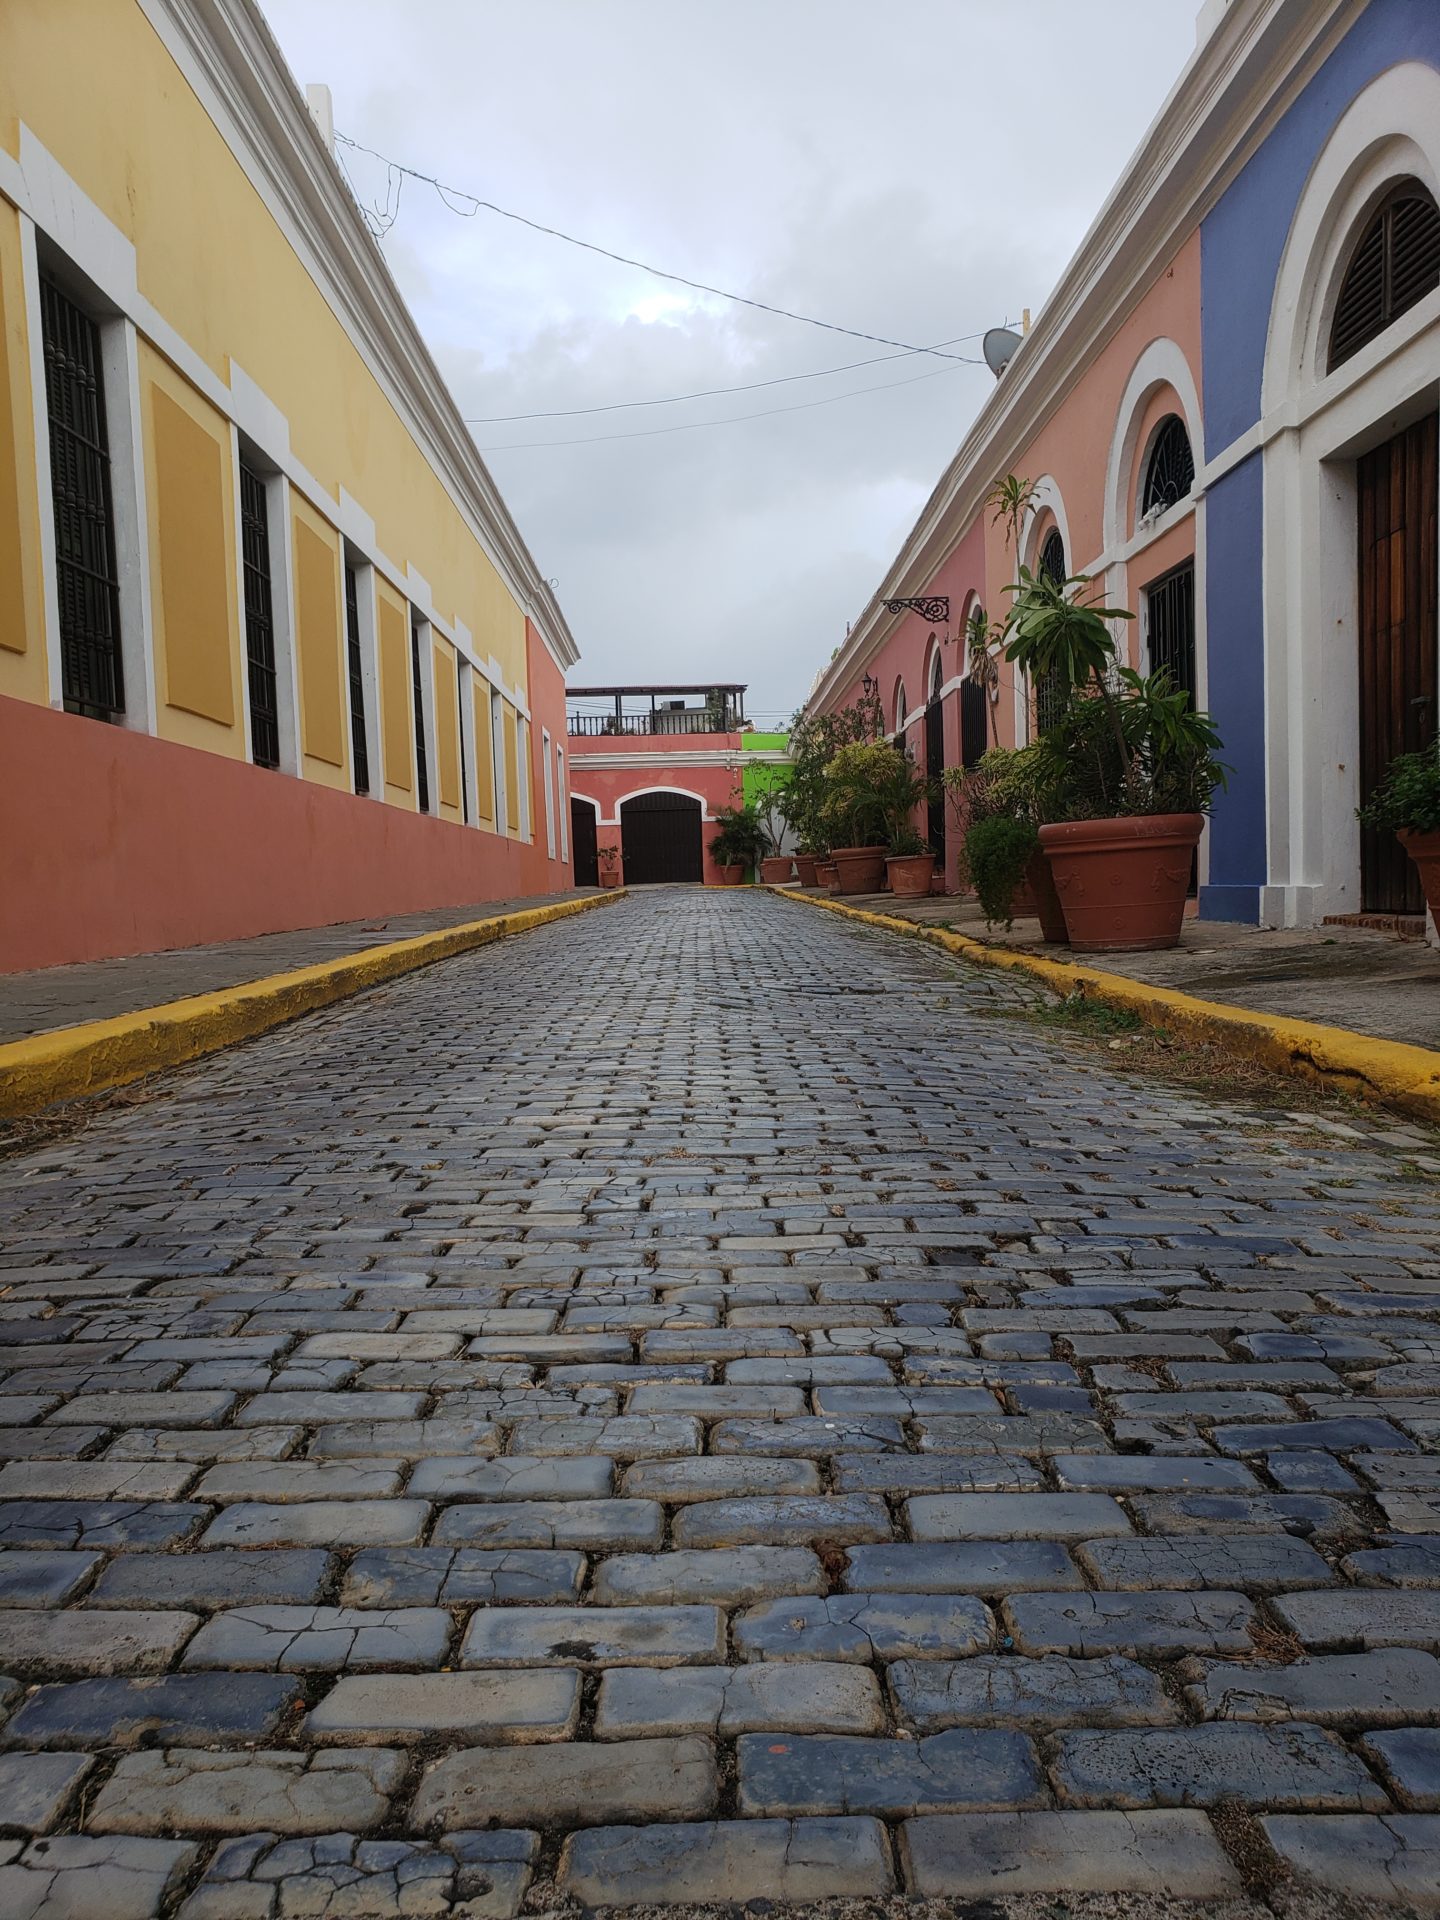 a brick road with colorful buildings